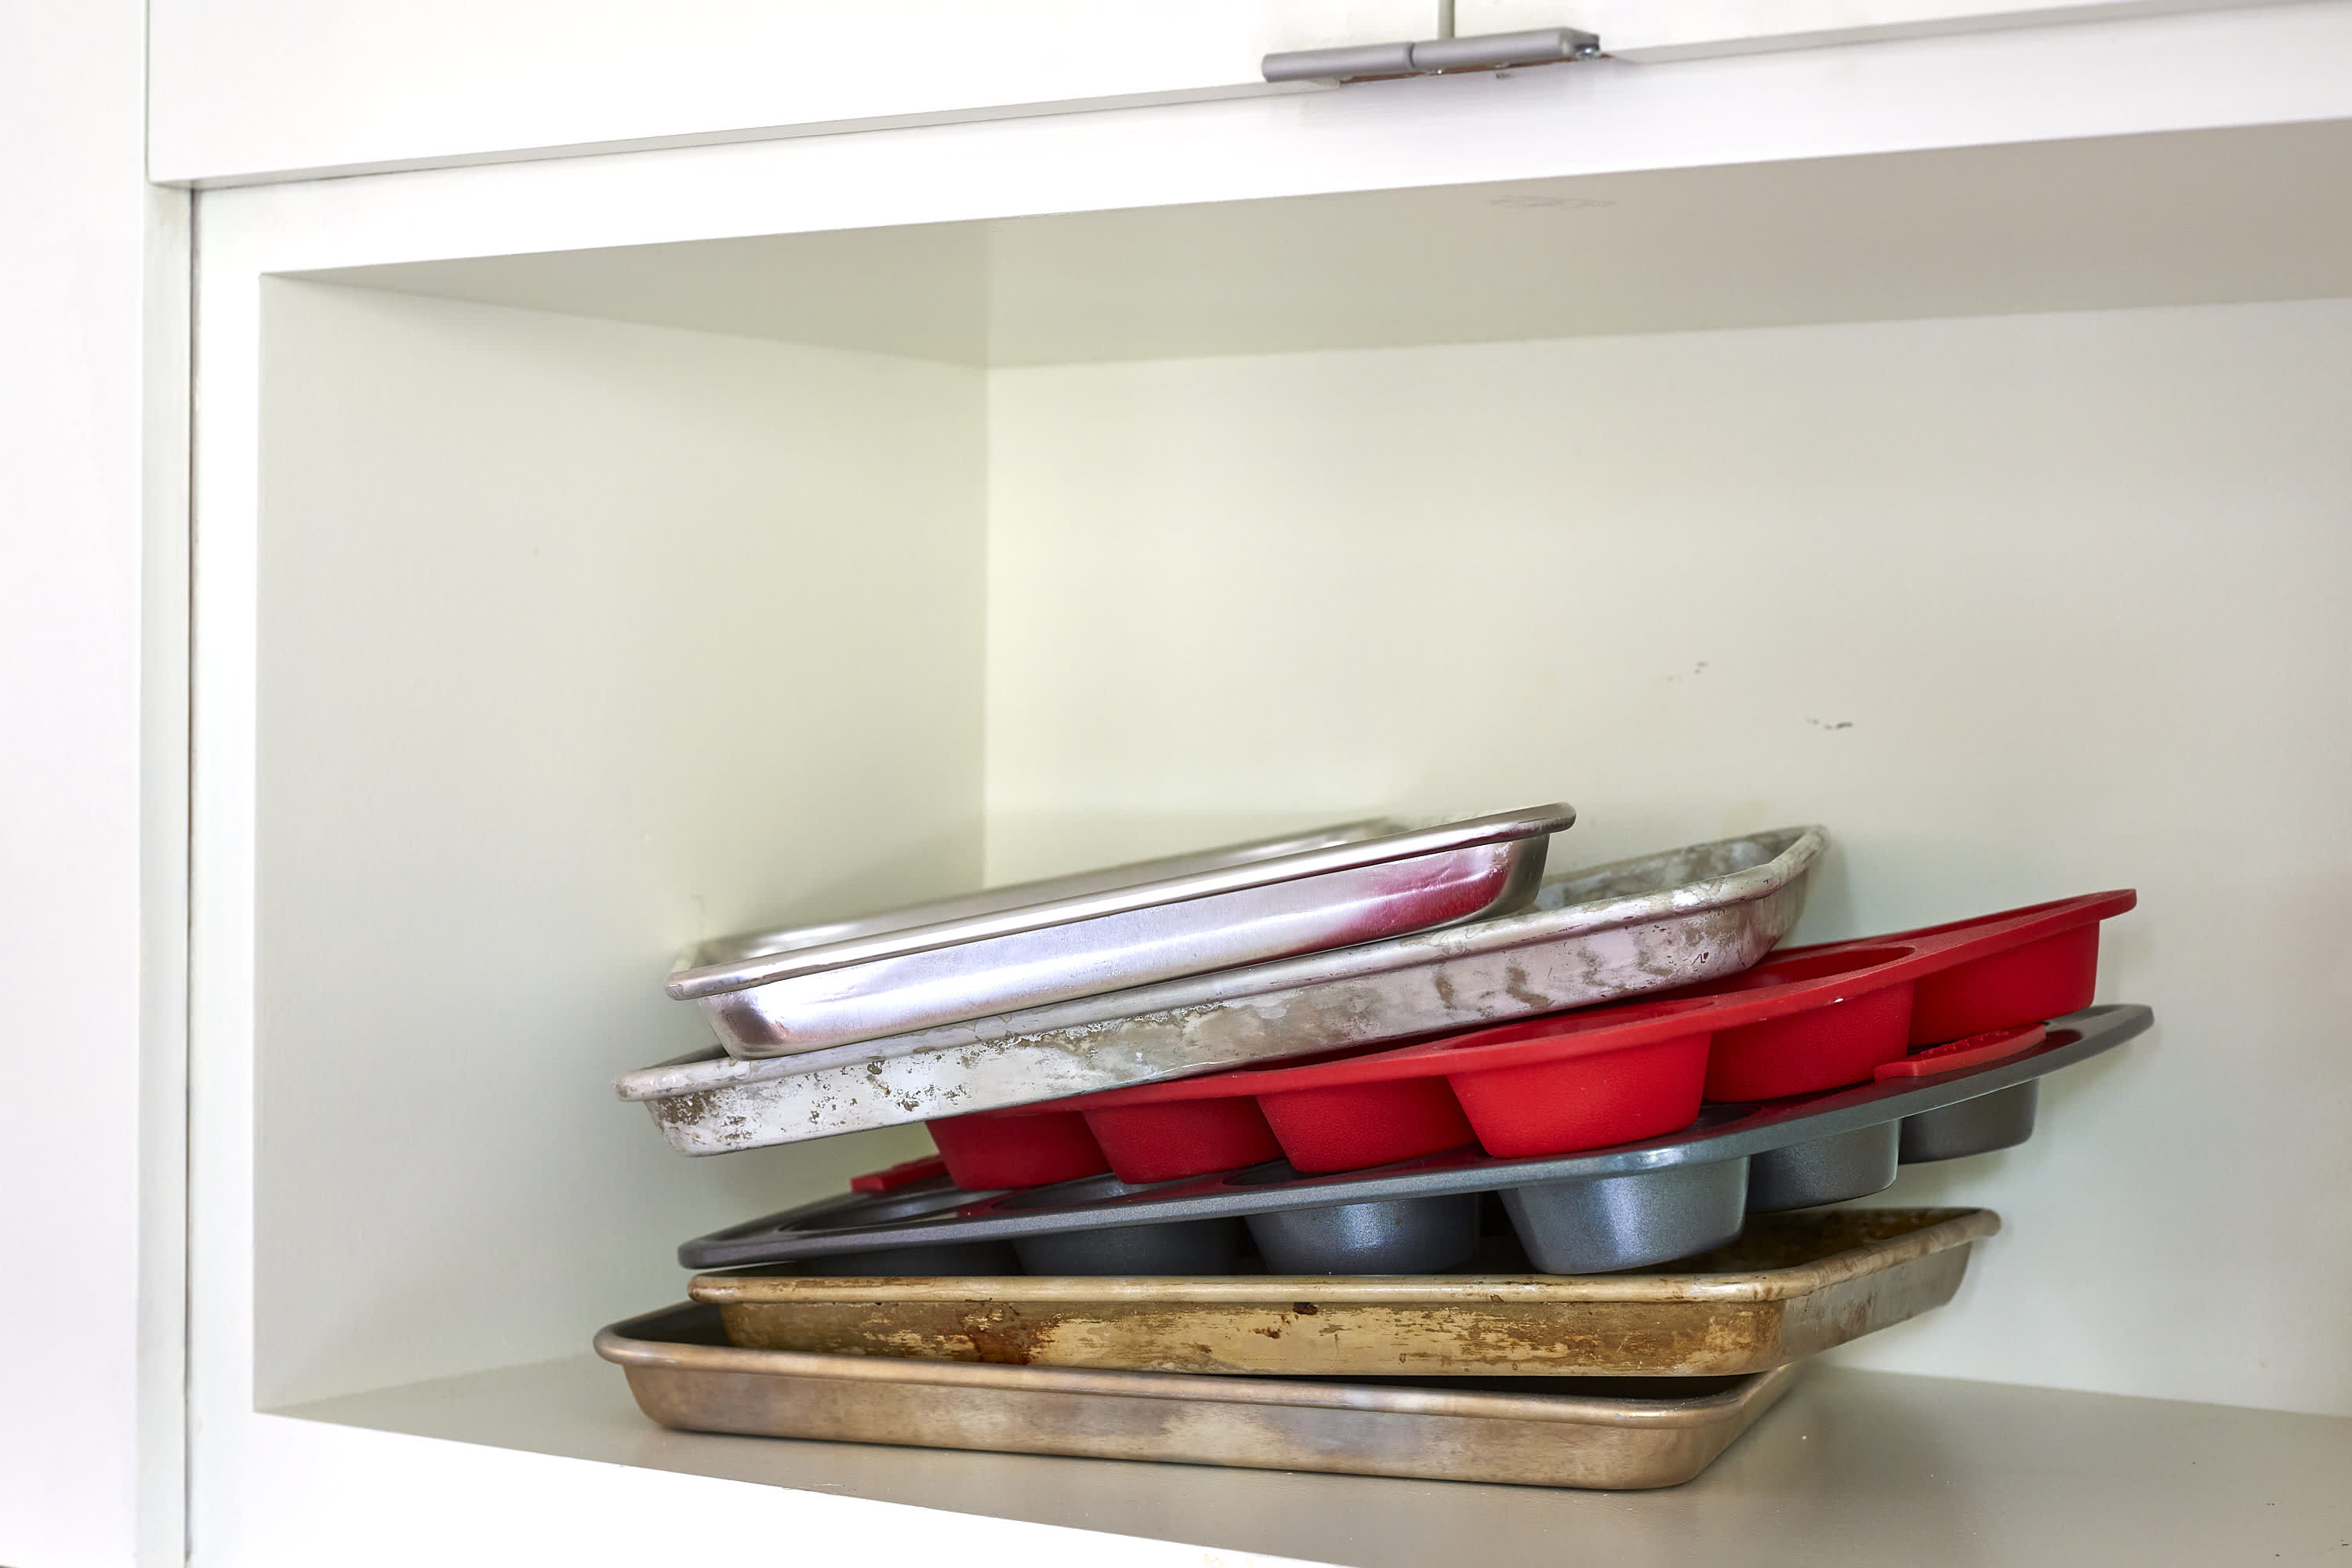 6 Cookie Sheet Organizer Ideas, How to Store Baking Sheets 2023